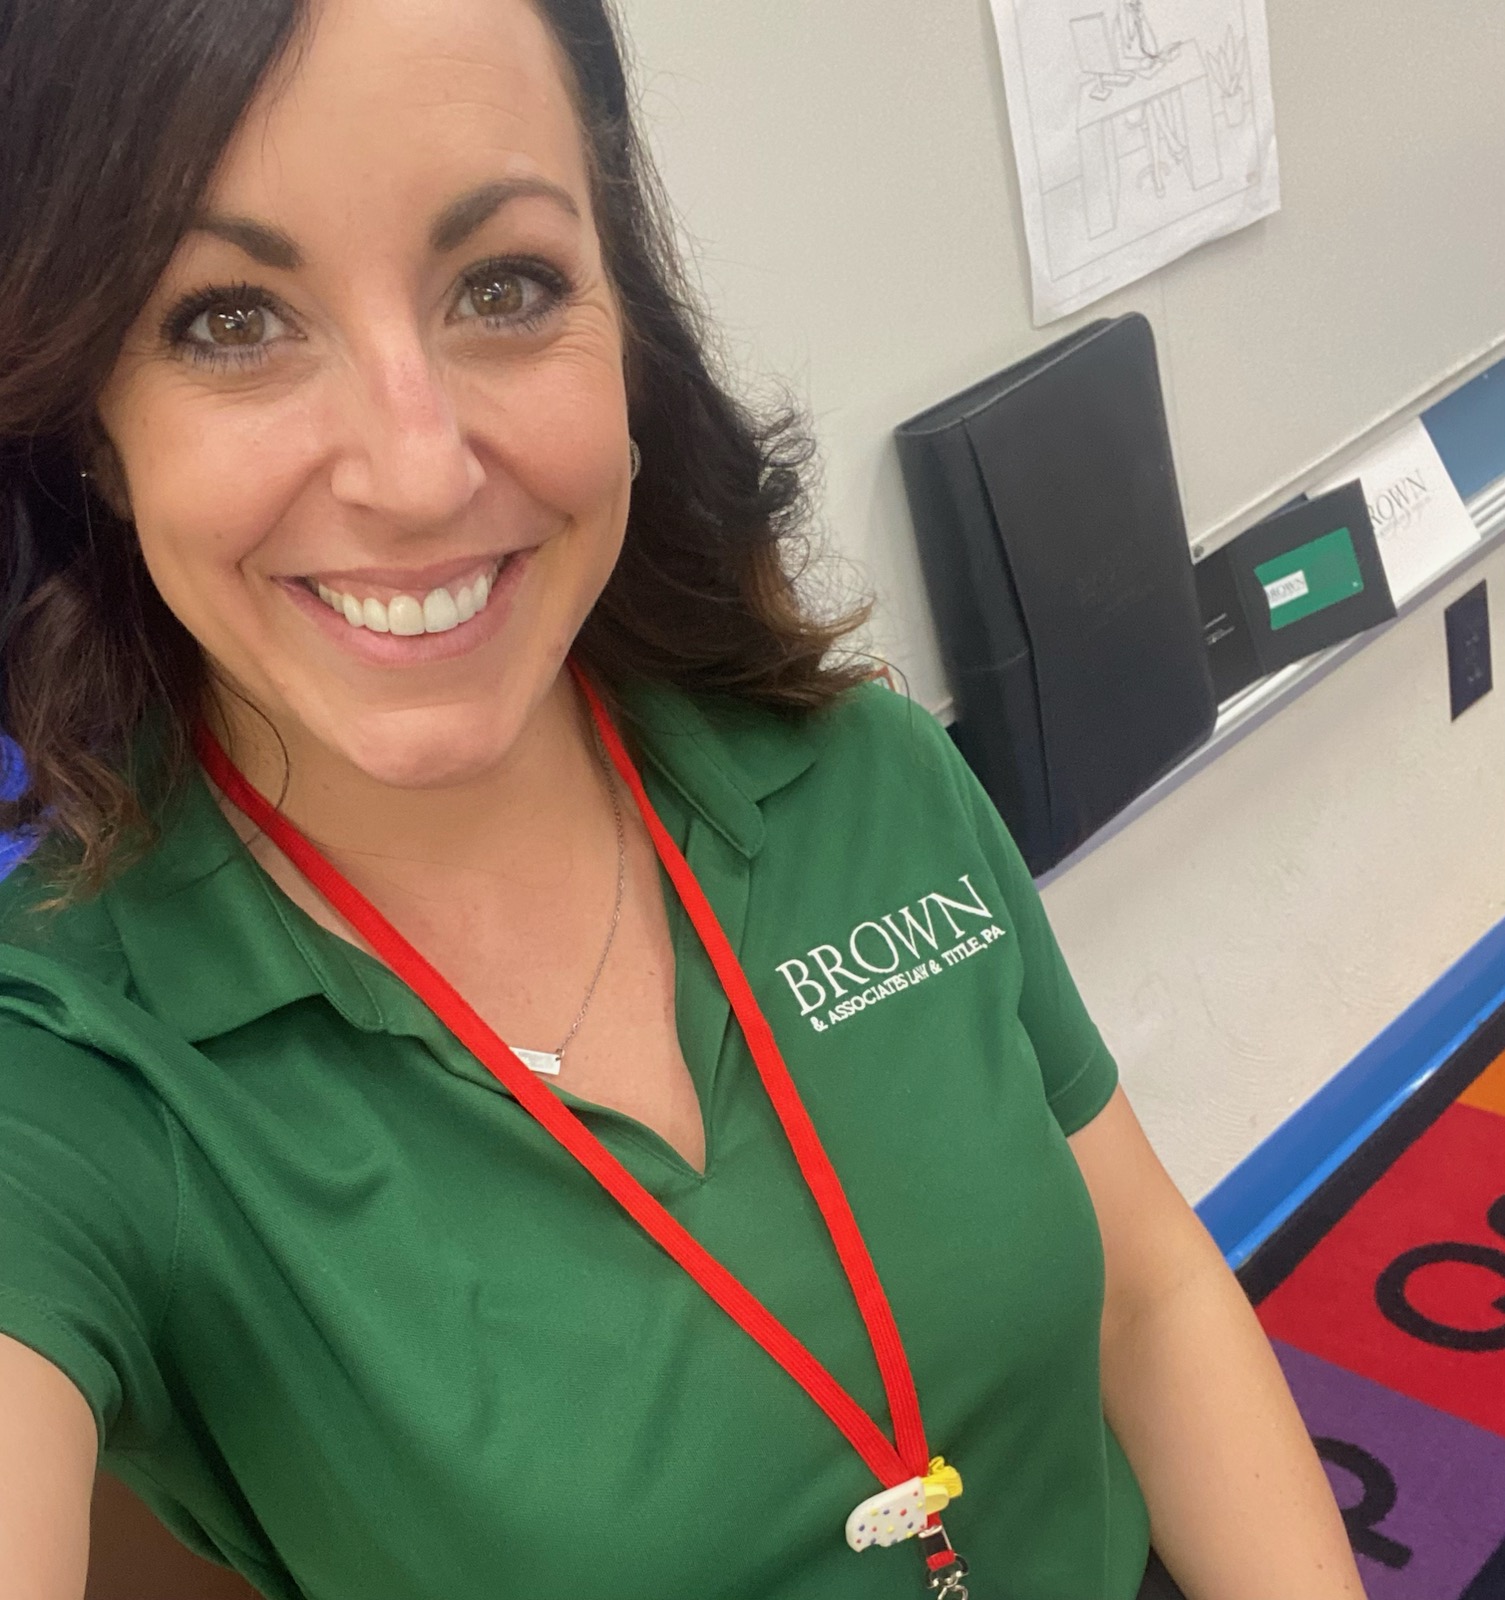 Alexandra volunteered at her daughter’s elementary school for Career Day and taught the Kindergarten classes all about her job as Operations Director and what a Real Estate law firm does to help others.